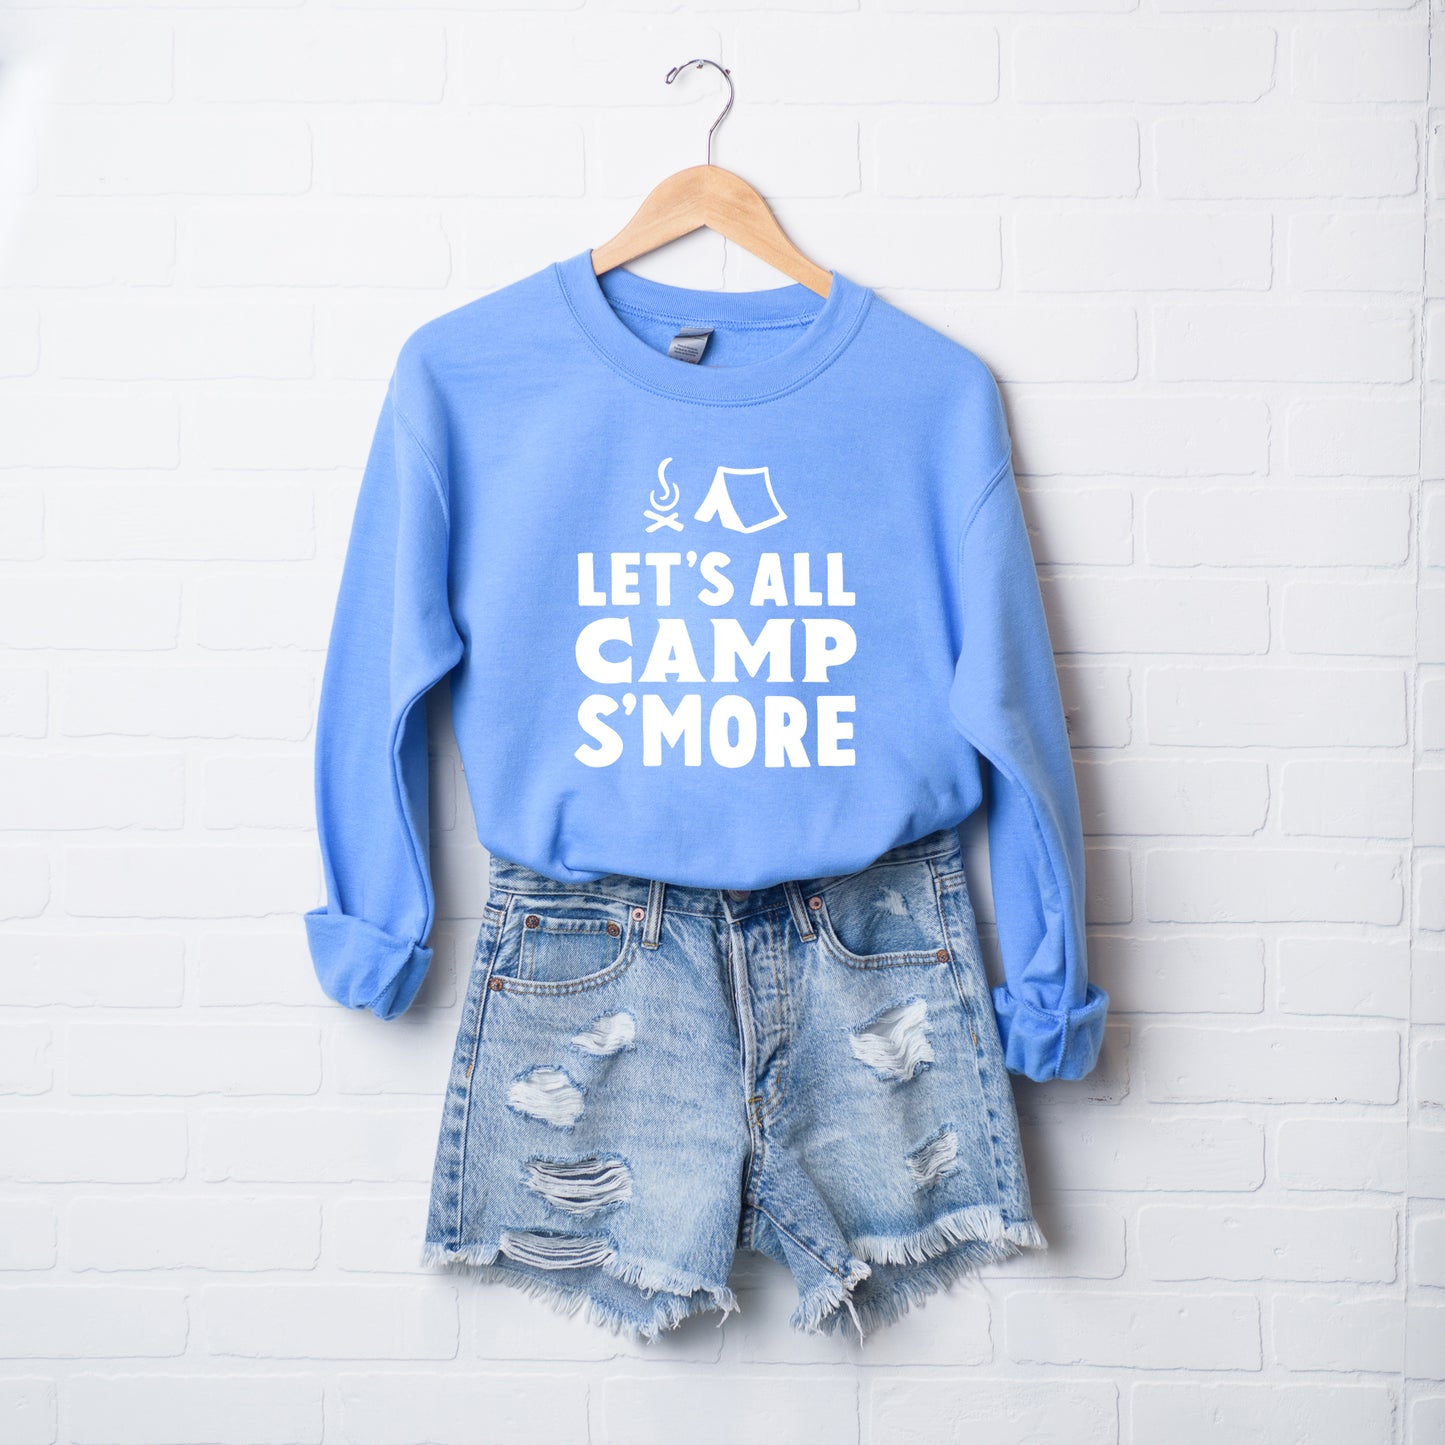 Let's All Camp S'More | Sweatshirt